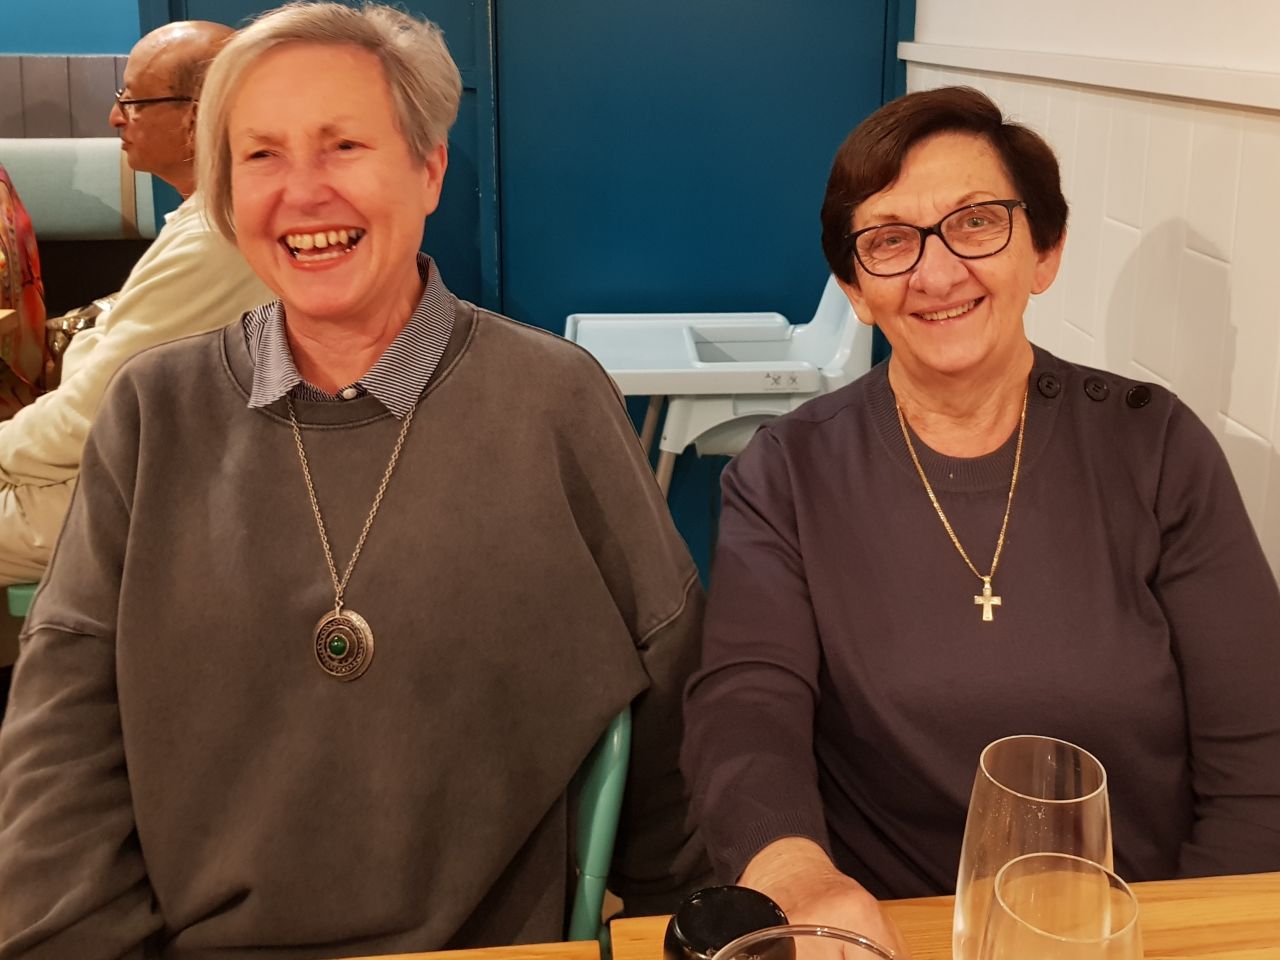 At our August 2022 dinner at Pirahna Fish Cafe, New Farm. A very enjoyable evening - good food and good company.
Photo: Courtesy Francesca.